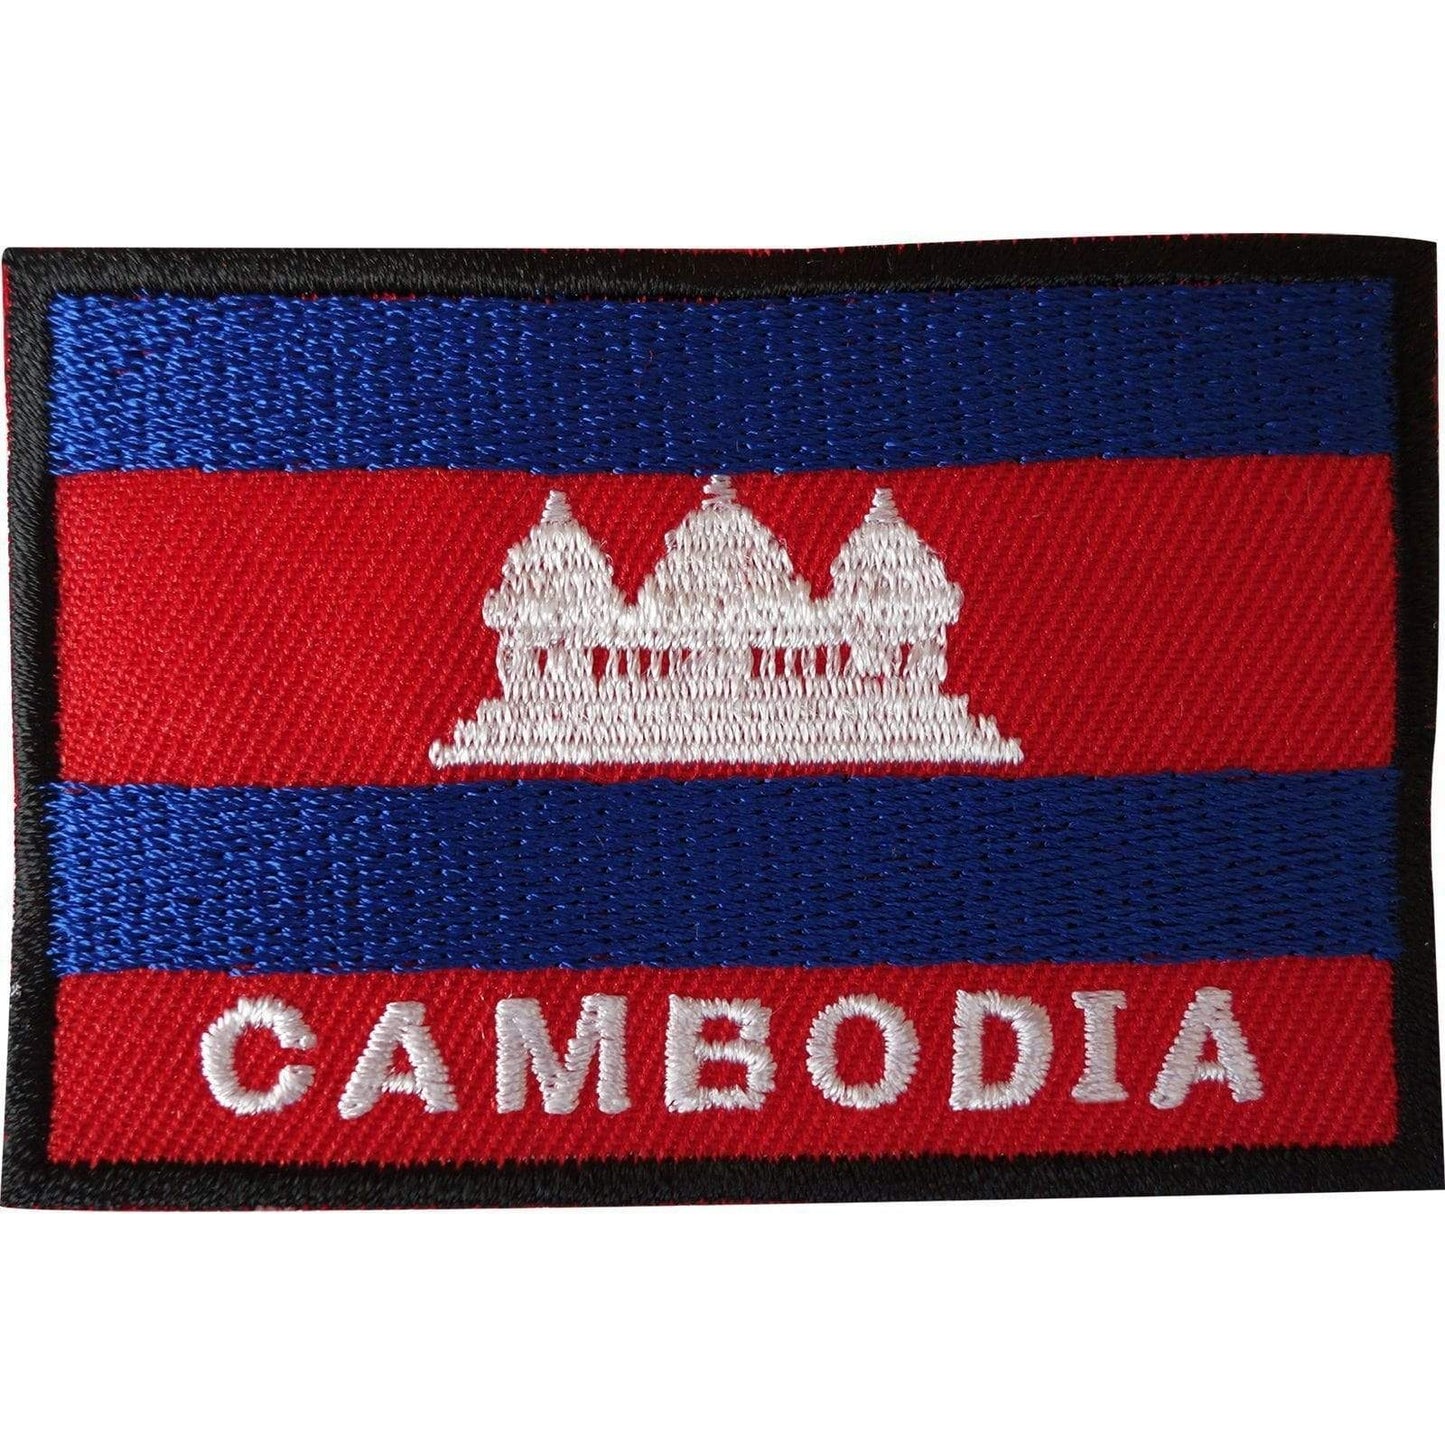 Cambodia Flag Patch Iron On / Sew On Clothes Jacket Embroidered Cambodian Badge